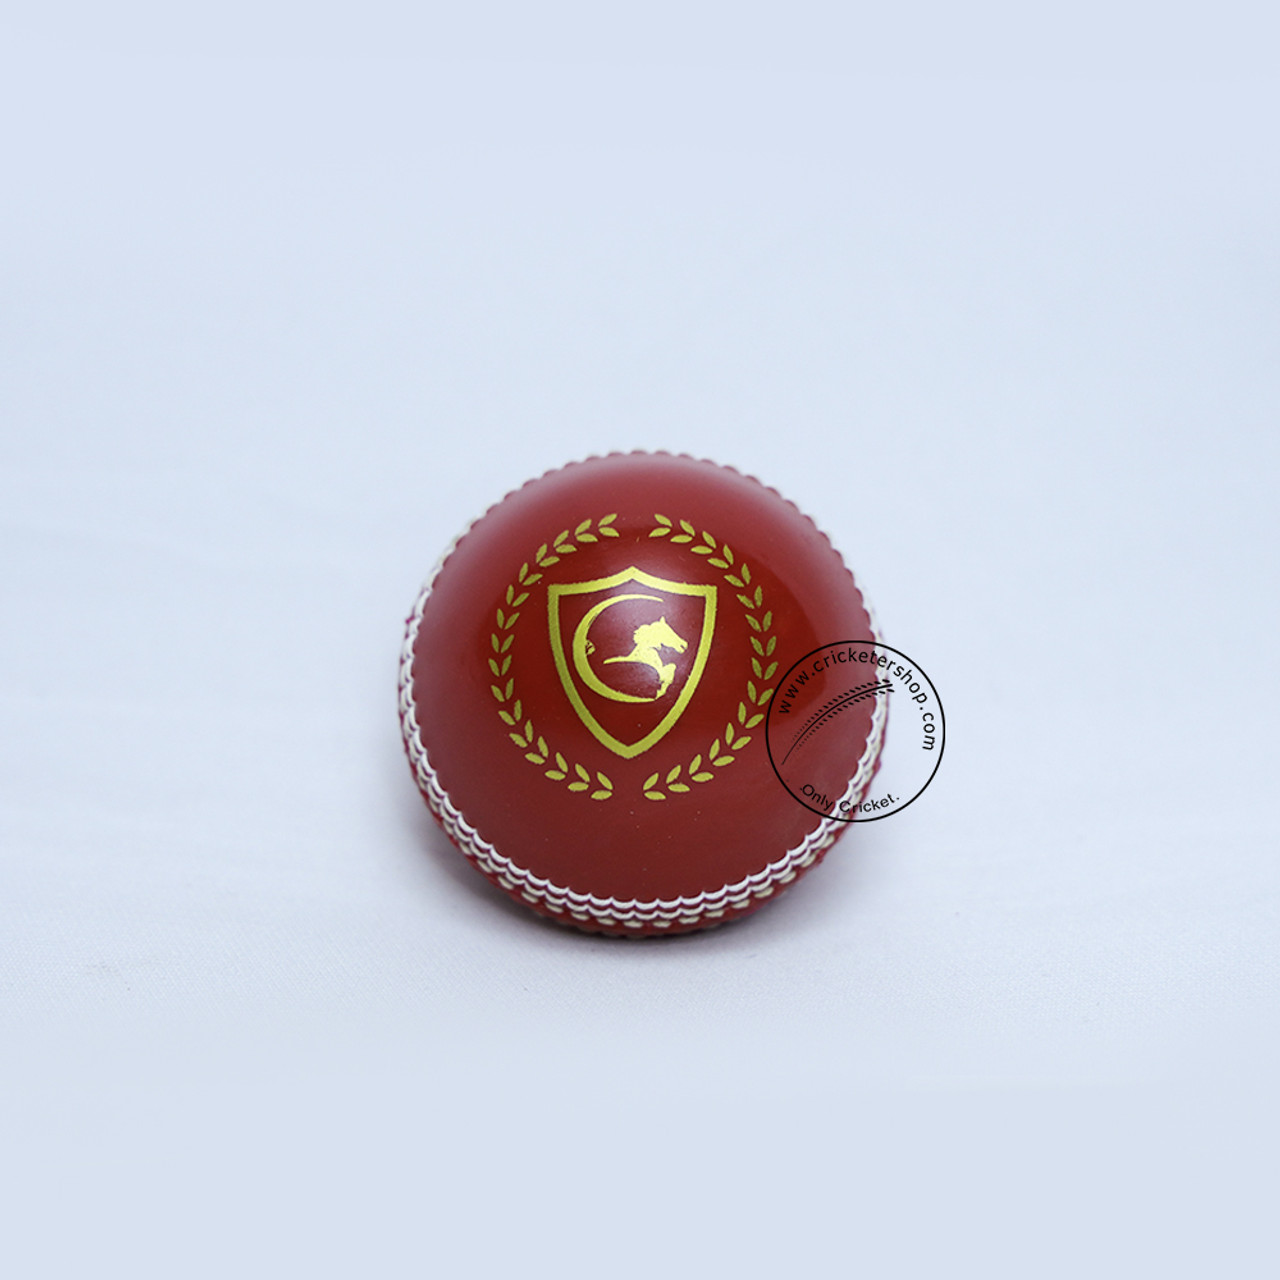 Gortonshire Incredible Ball Buy Online at Indias Specialist Cricket Shop Price, Photos and Features Gortonshire Cricket 